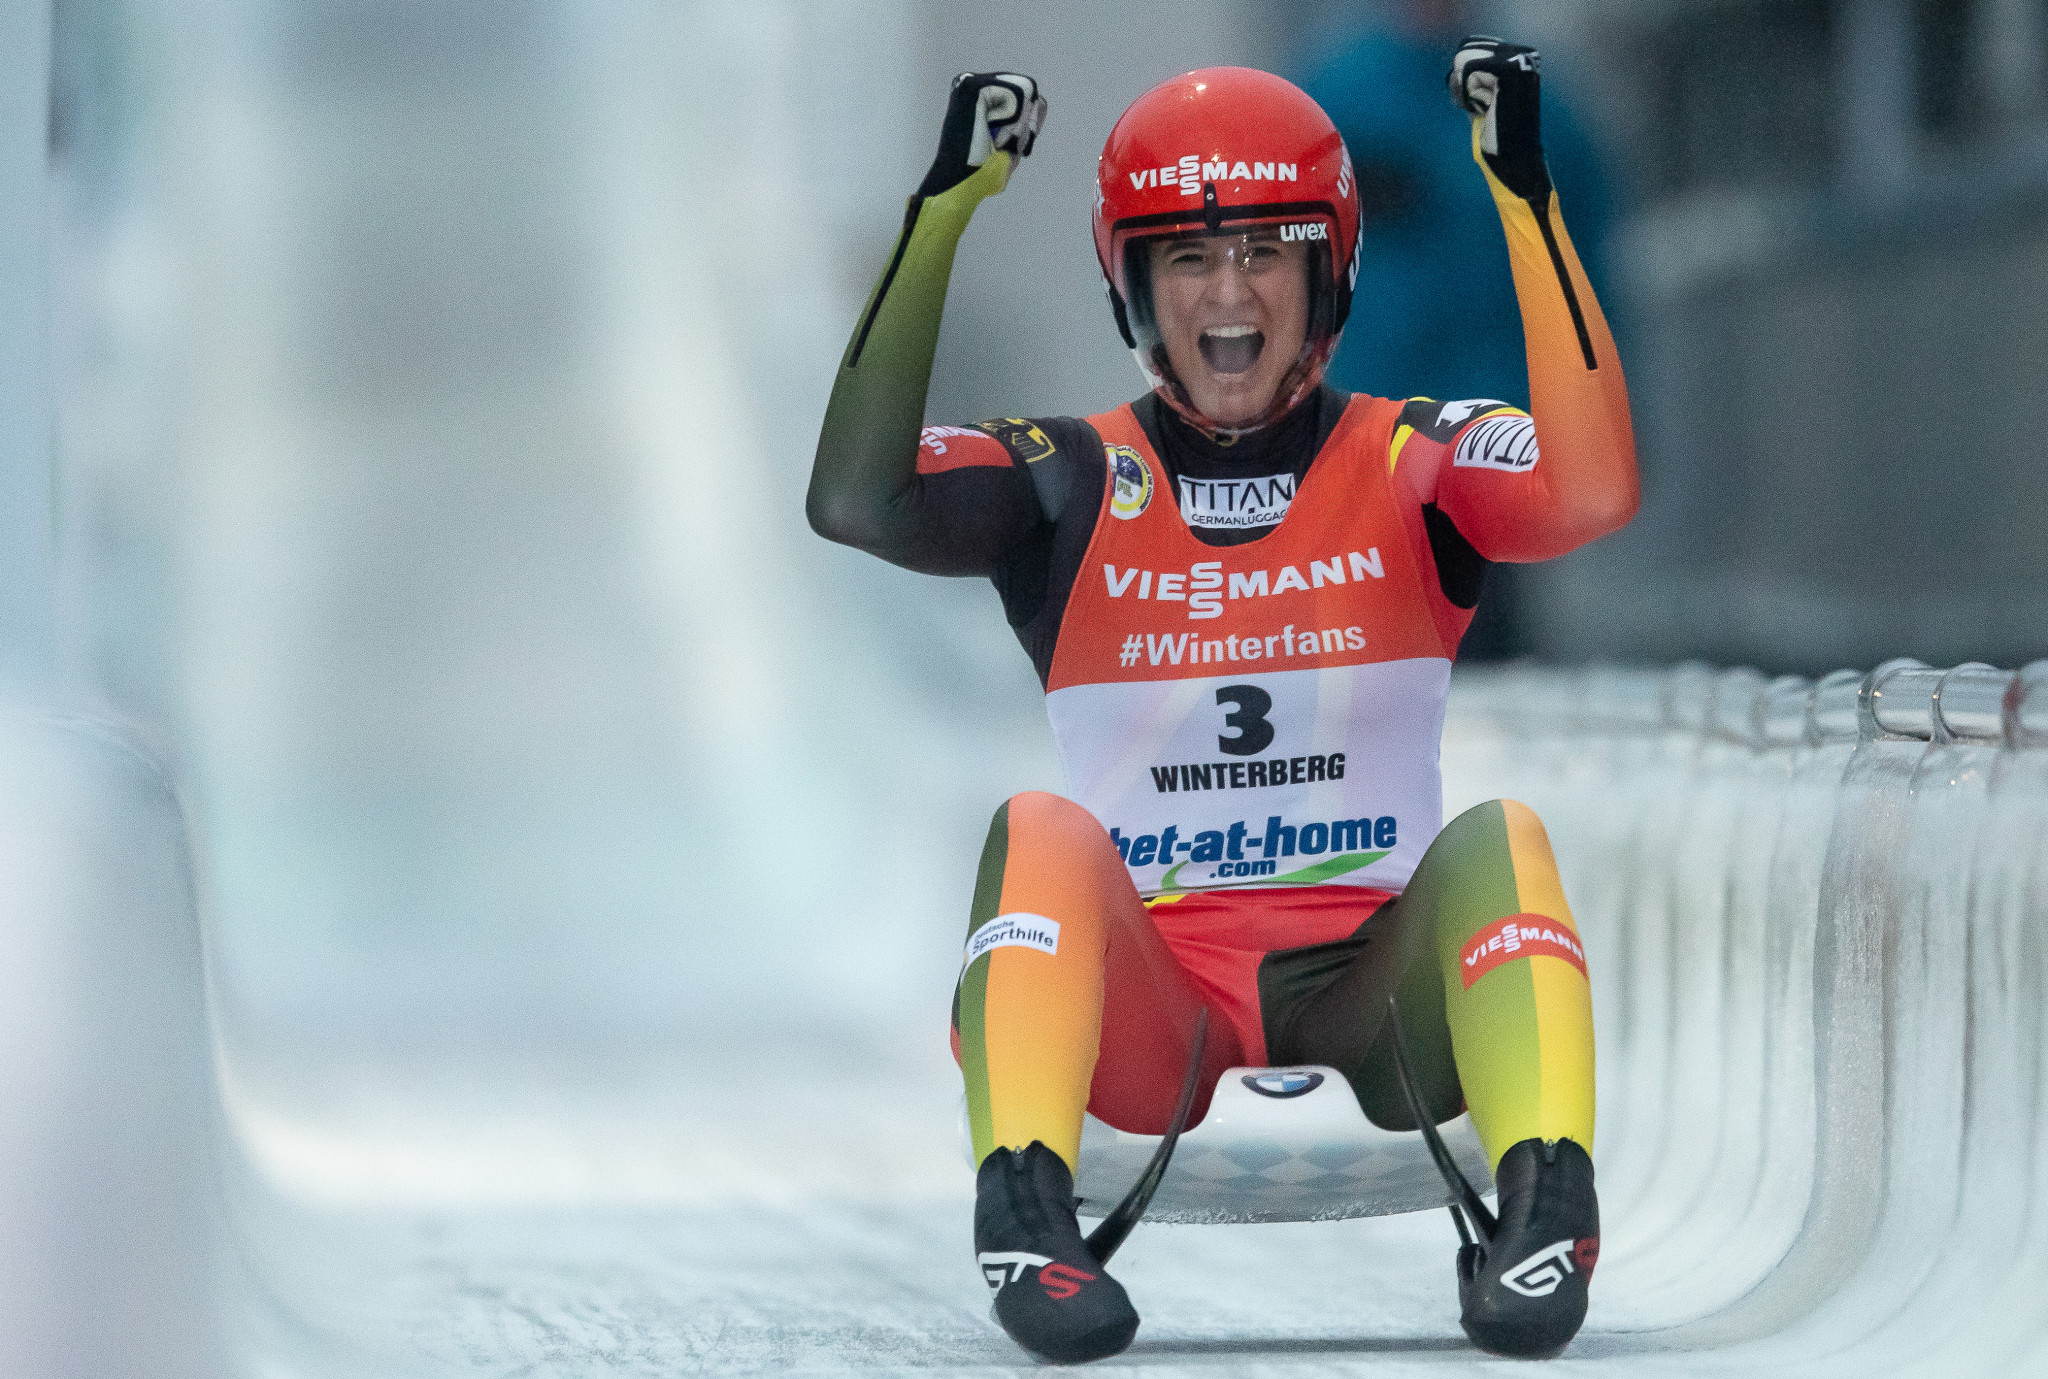 Germany's Natalie Geisenberger achieved a historic quadruple after winning the FIL Luge World Cup final in Sochi ©Getty Images